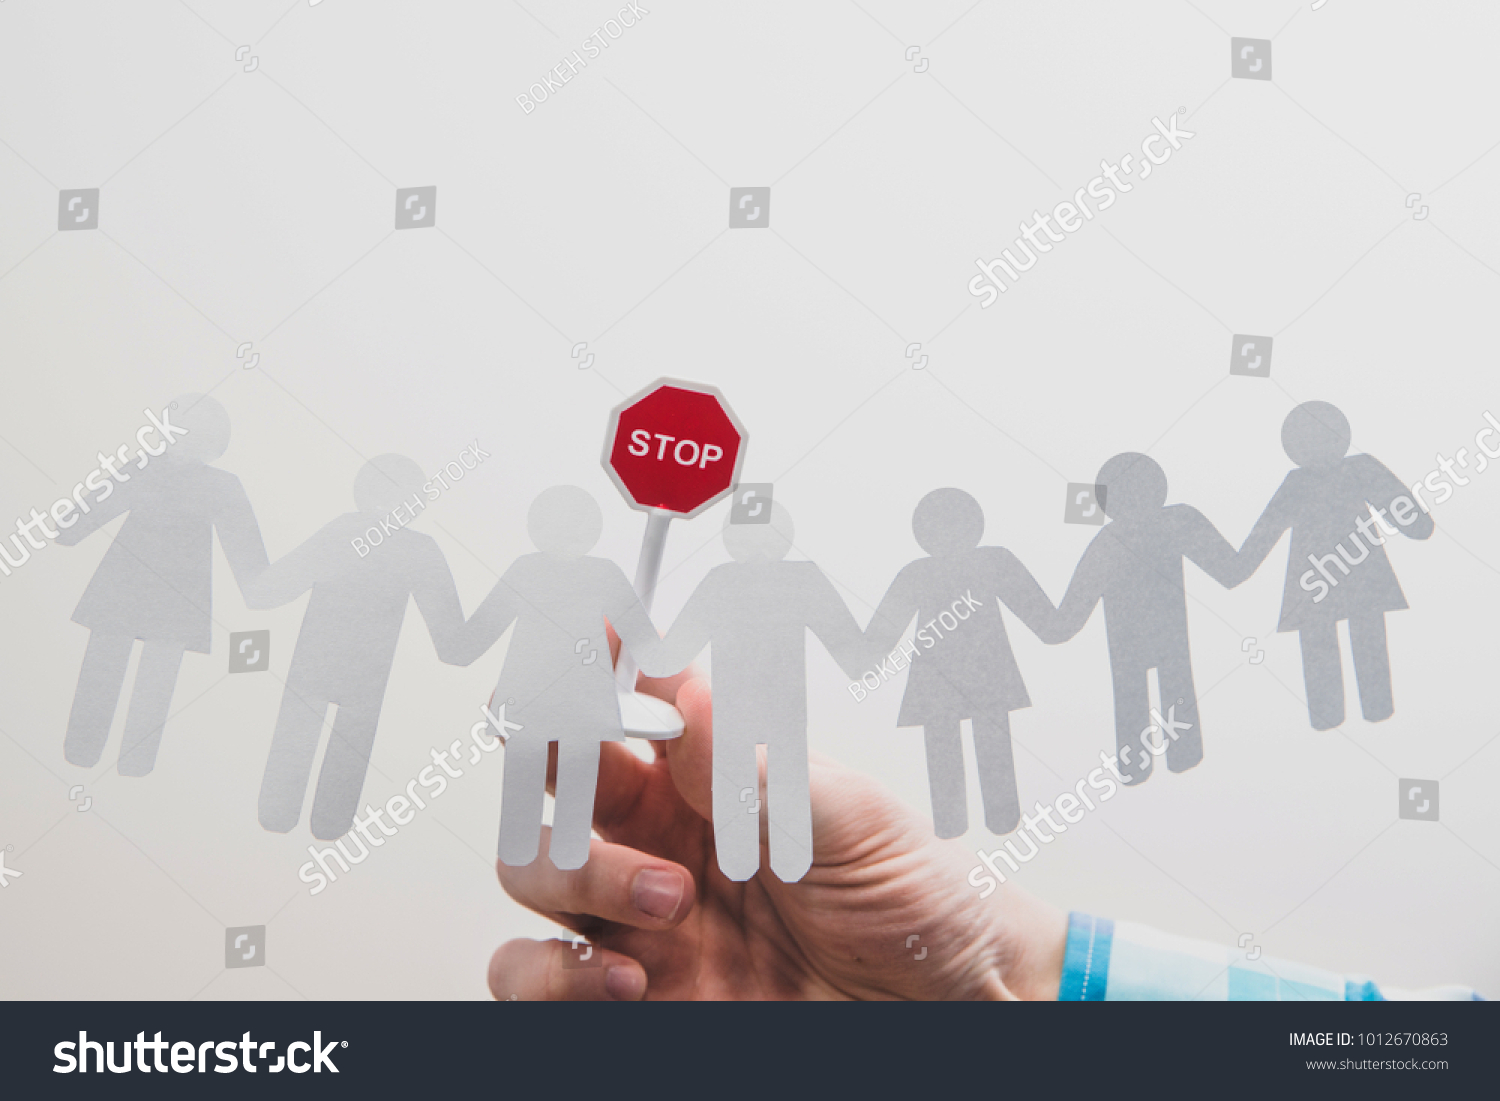 Hand holding a stop sign over one of the people in the crowd. Characters cut from paper. The boss or superior orders to stop the bad practices. Warns the employee against bad work. #1012670863